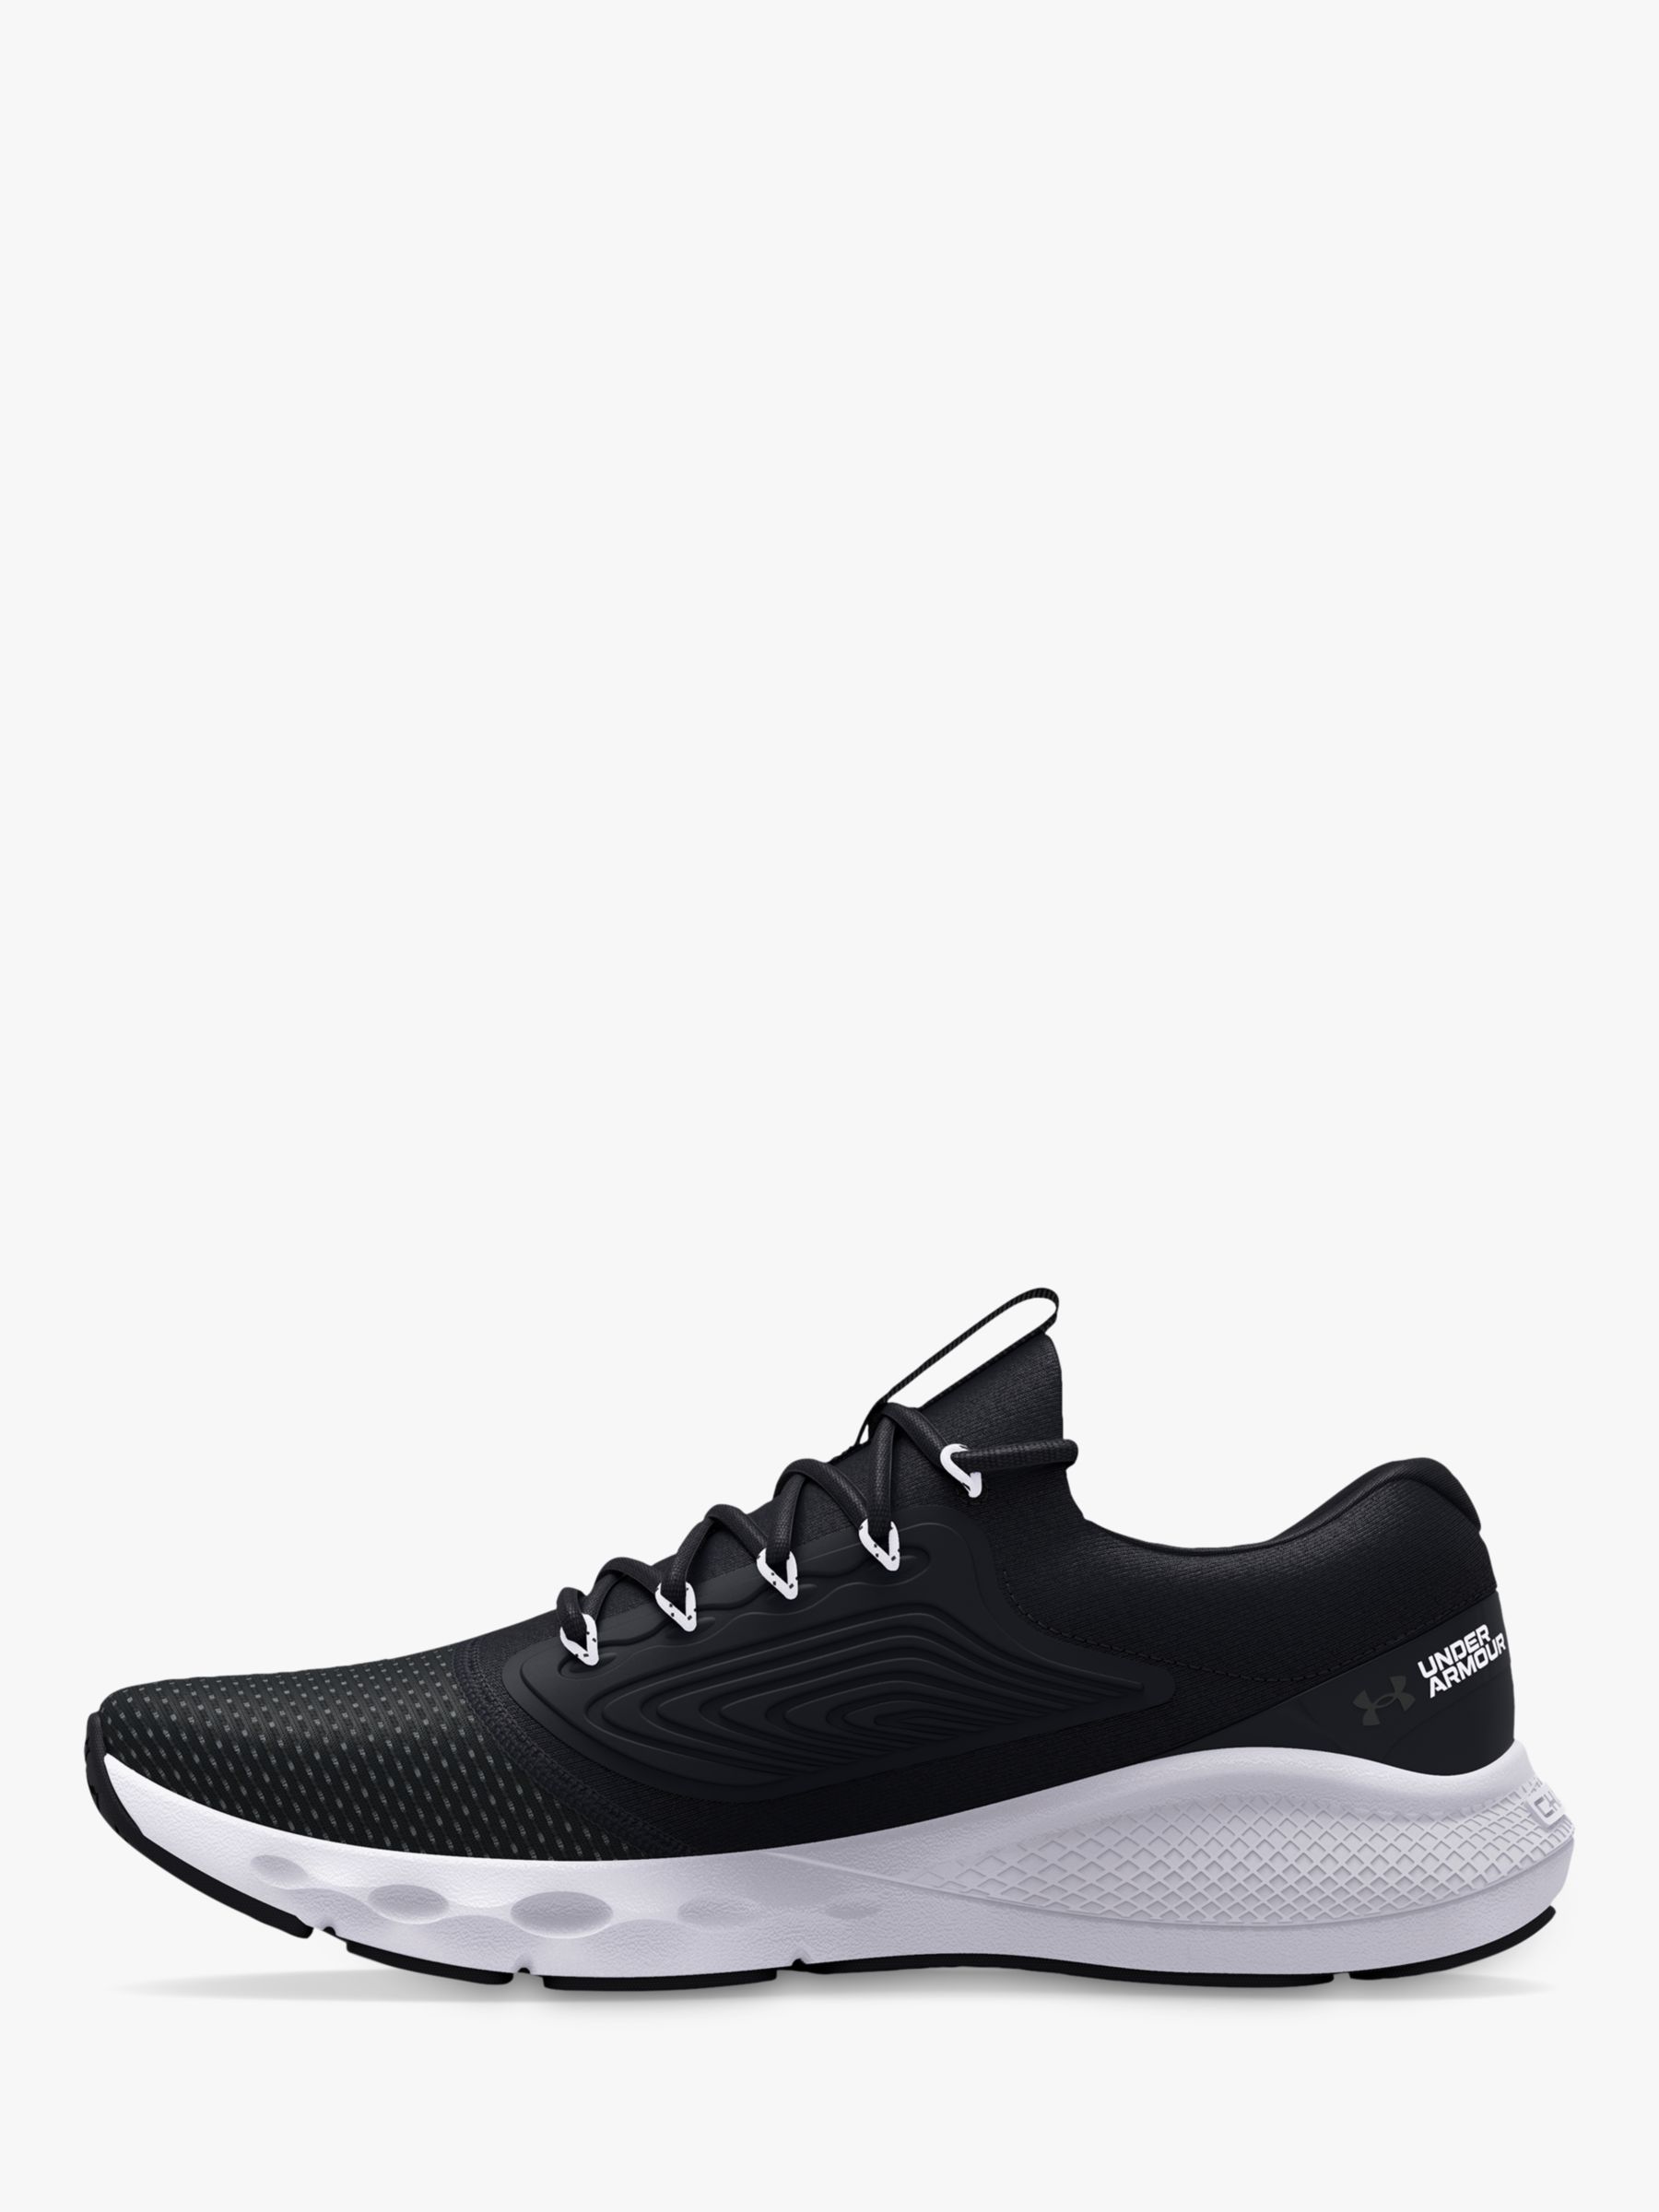 Under Armour Charged Vantage 2 Running Shoes, Black at John Lewis & Partners